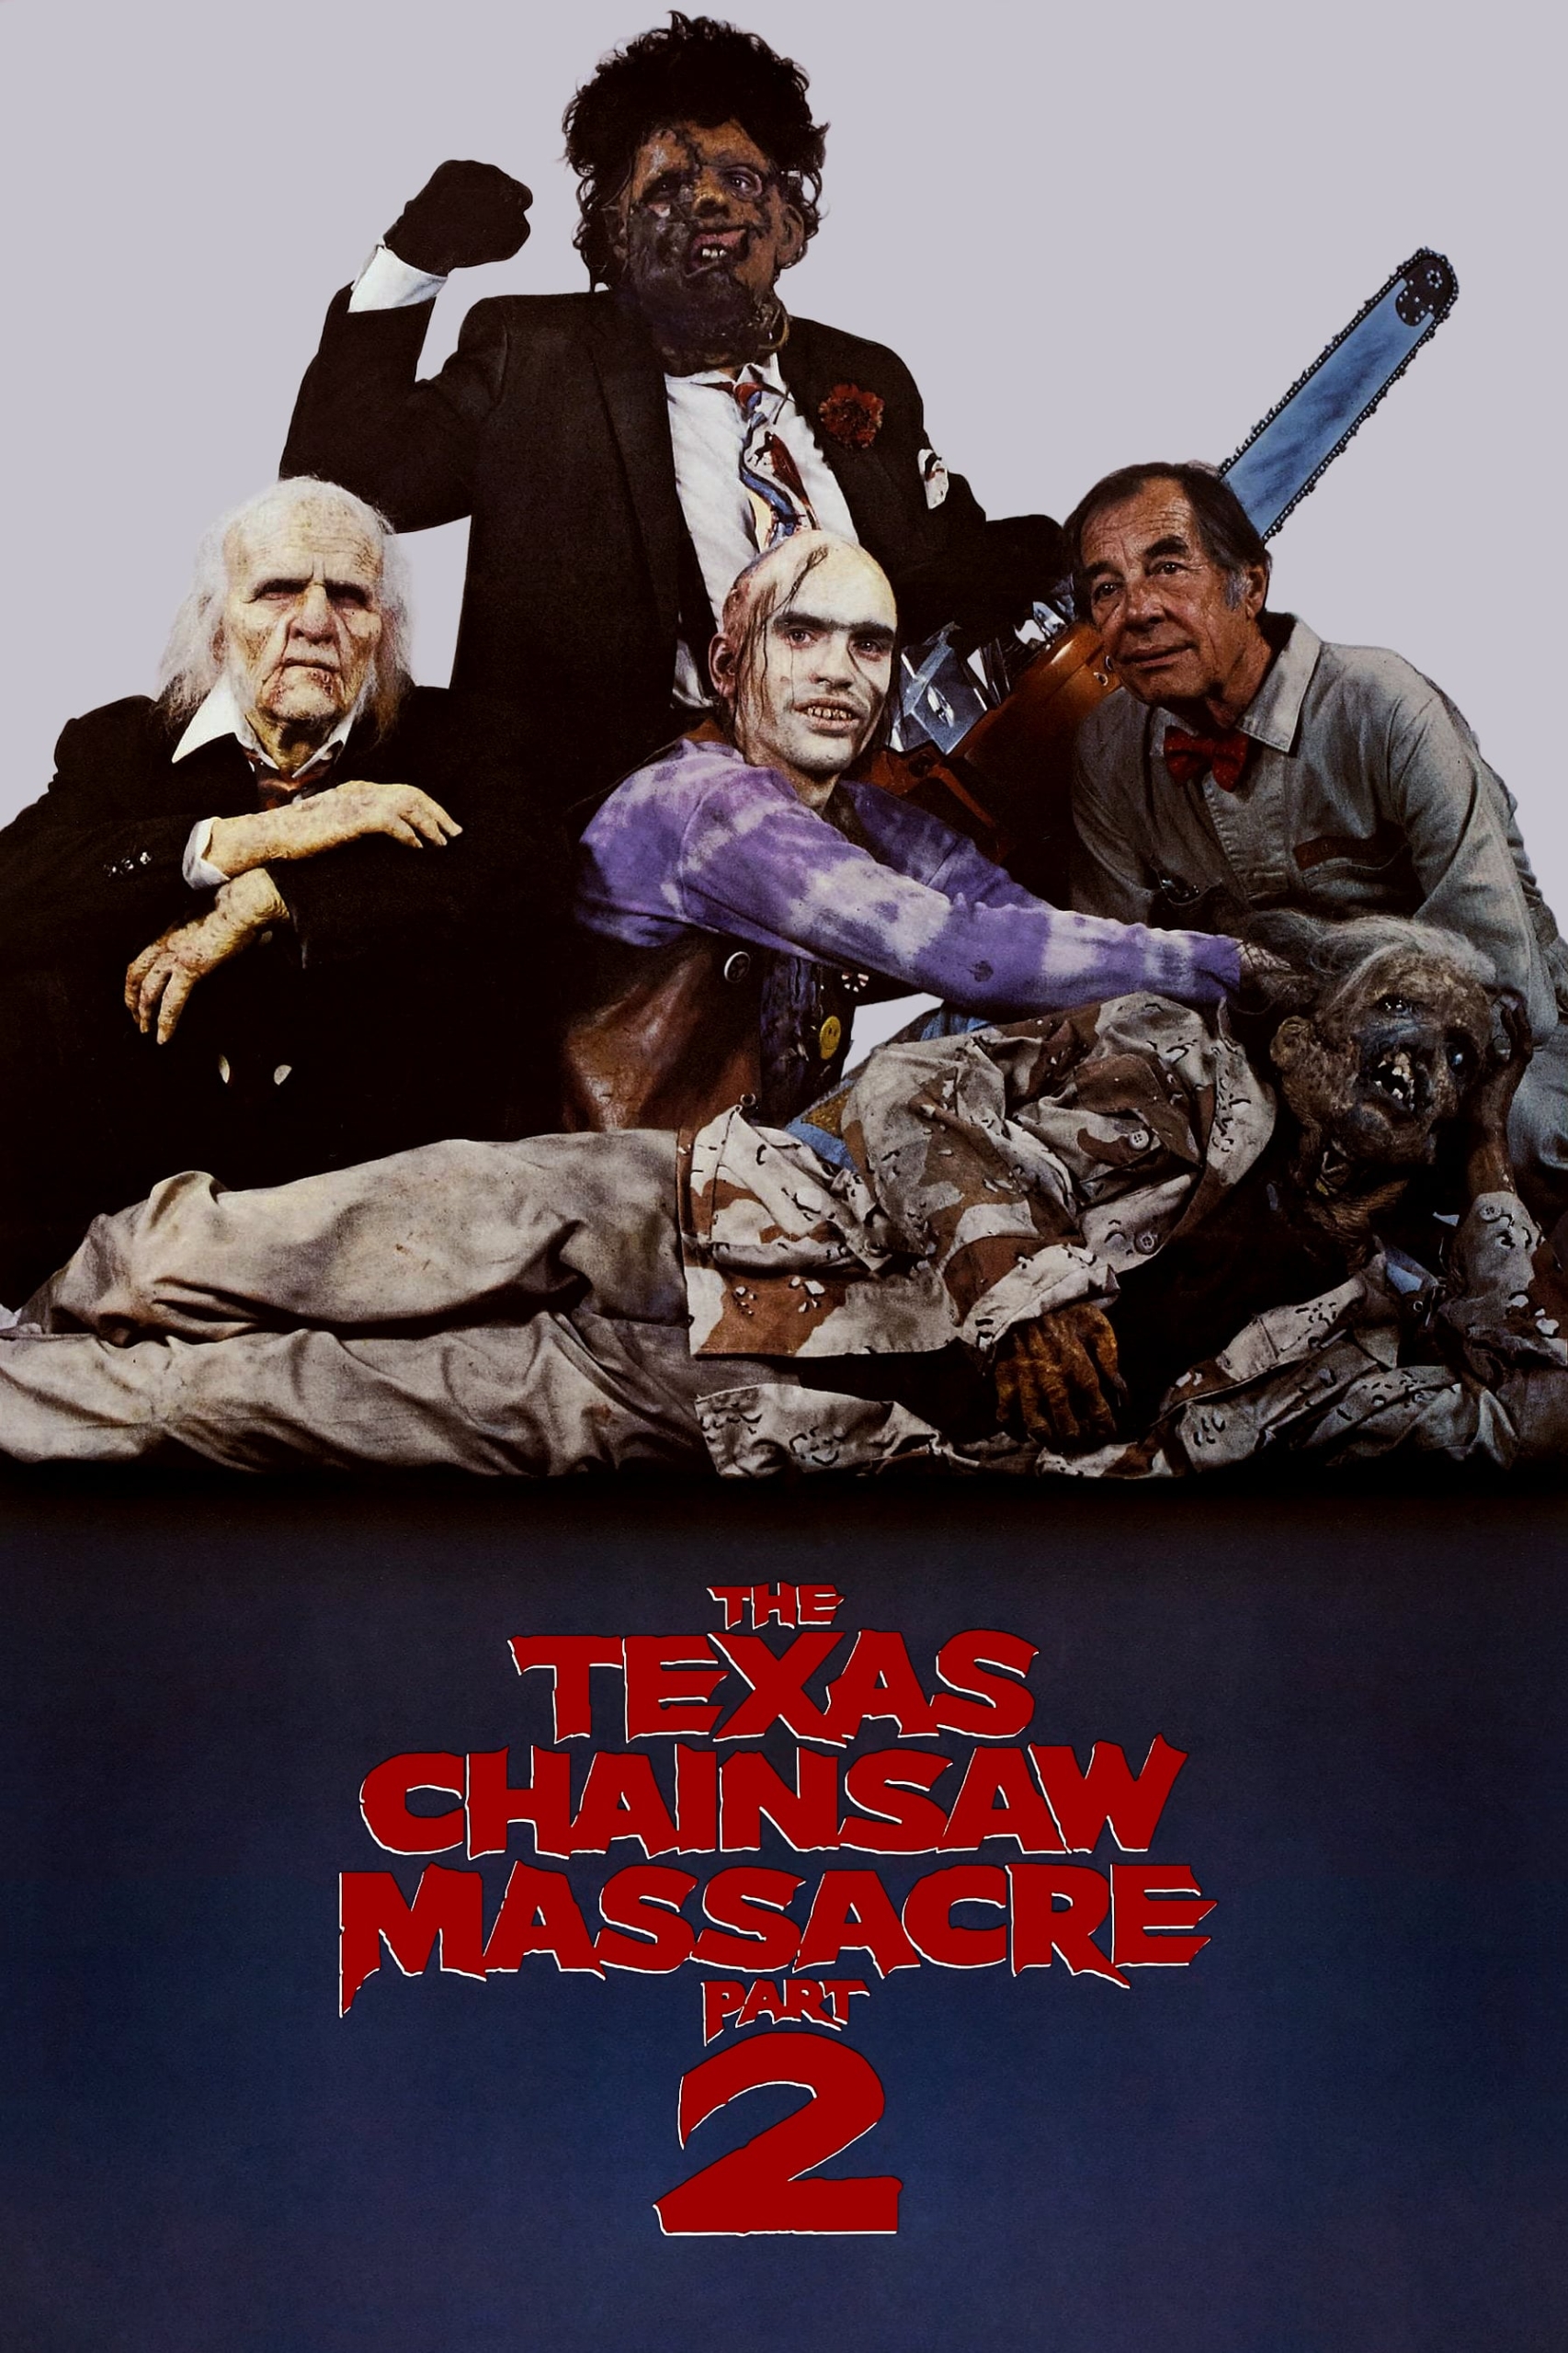 Poster for the movie "The Texas Chainsaw Massacre 2"